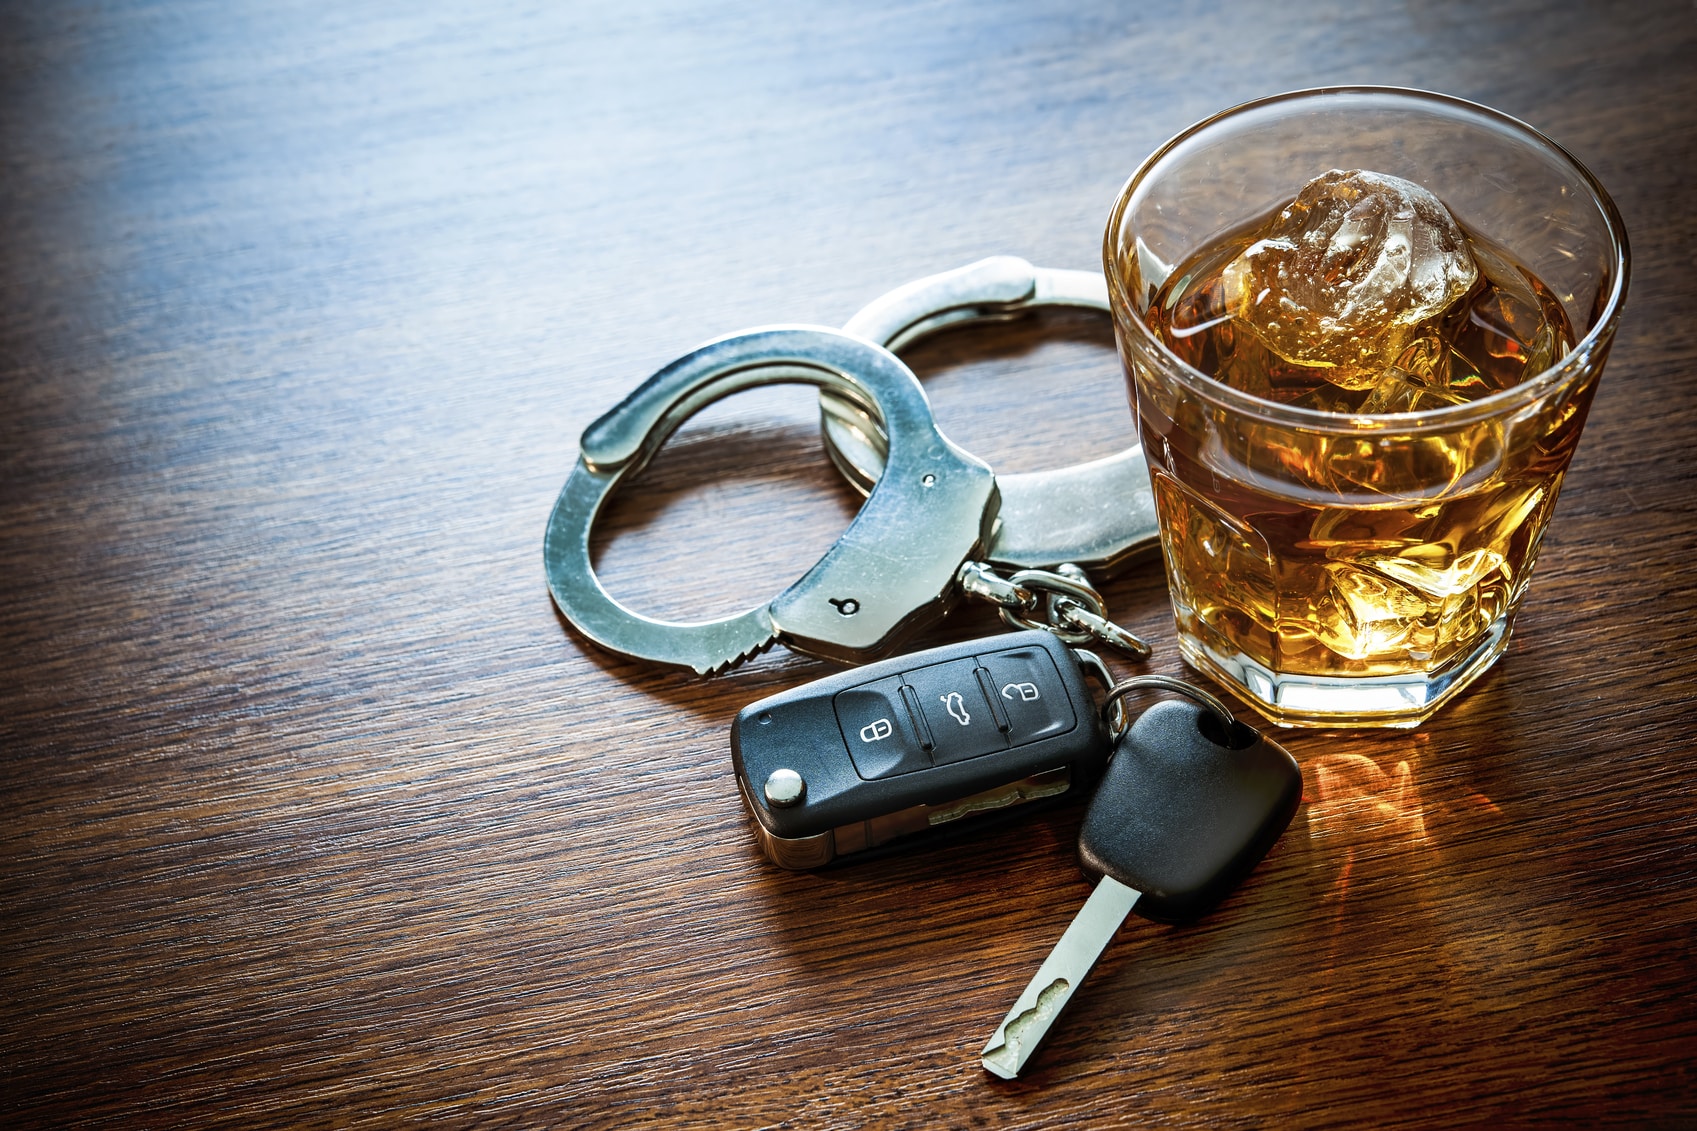 What Are Your Choices? What to Do After Getting Your First DUI in West Chester, PA